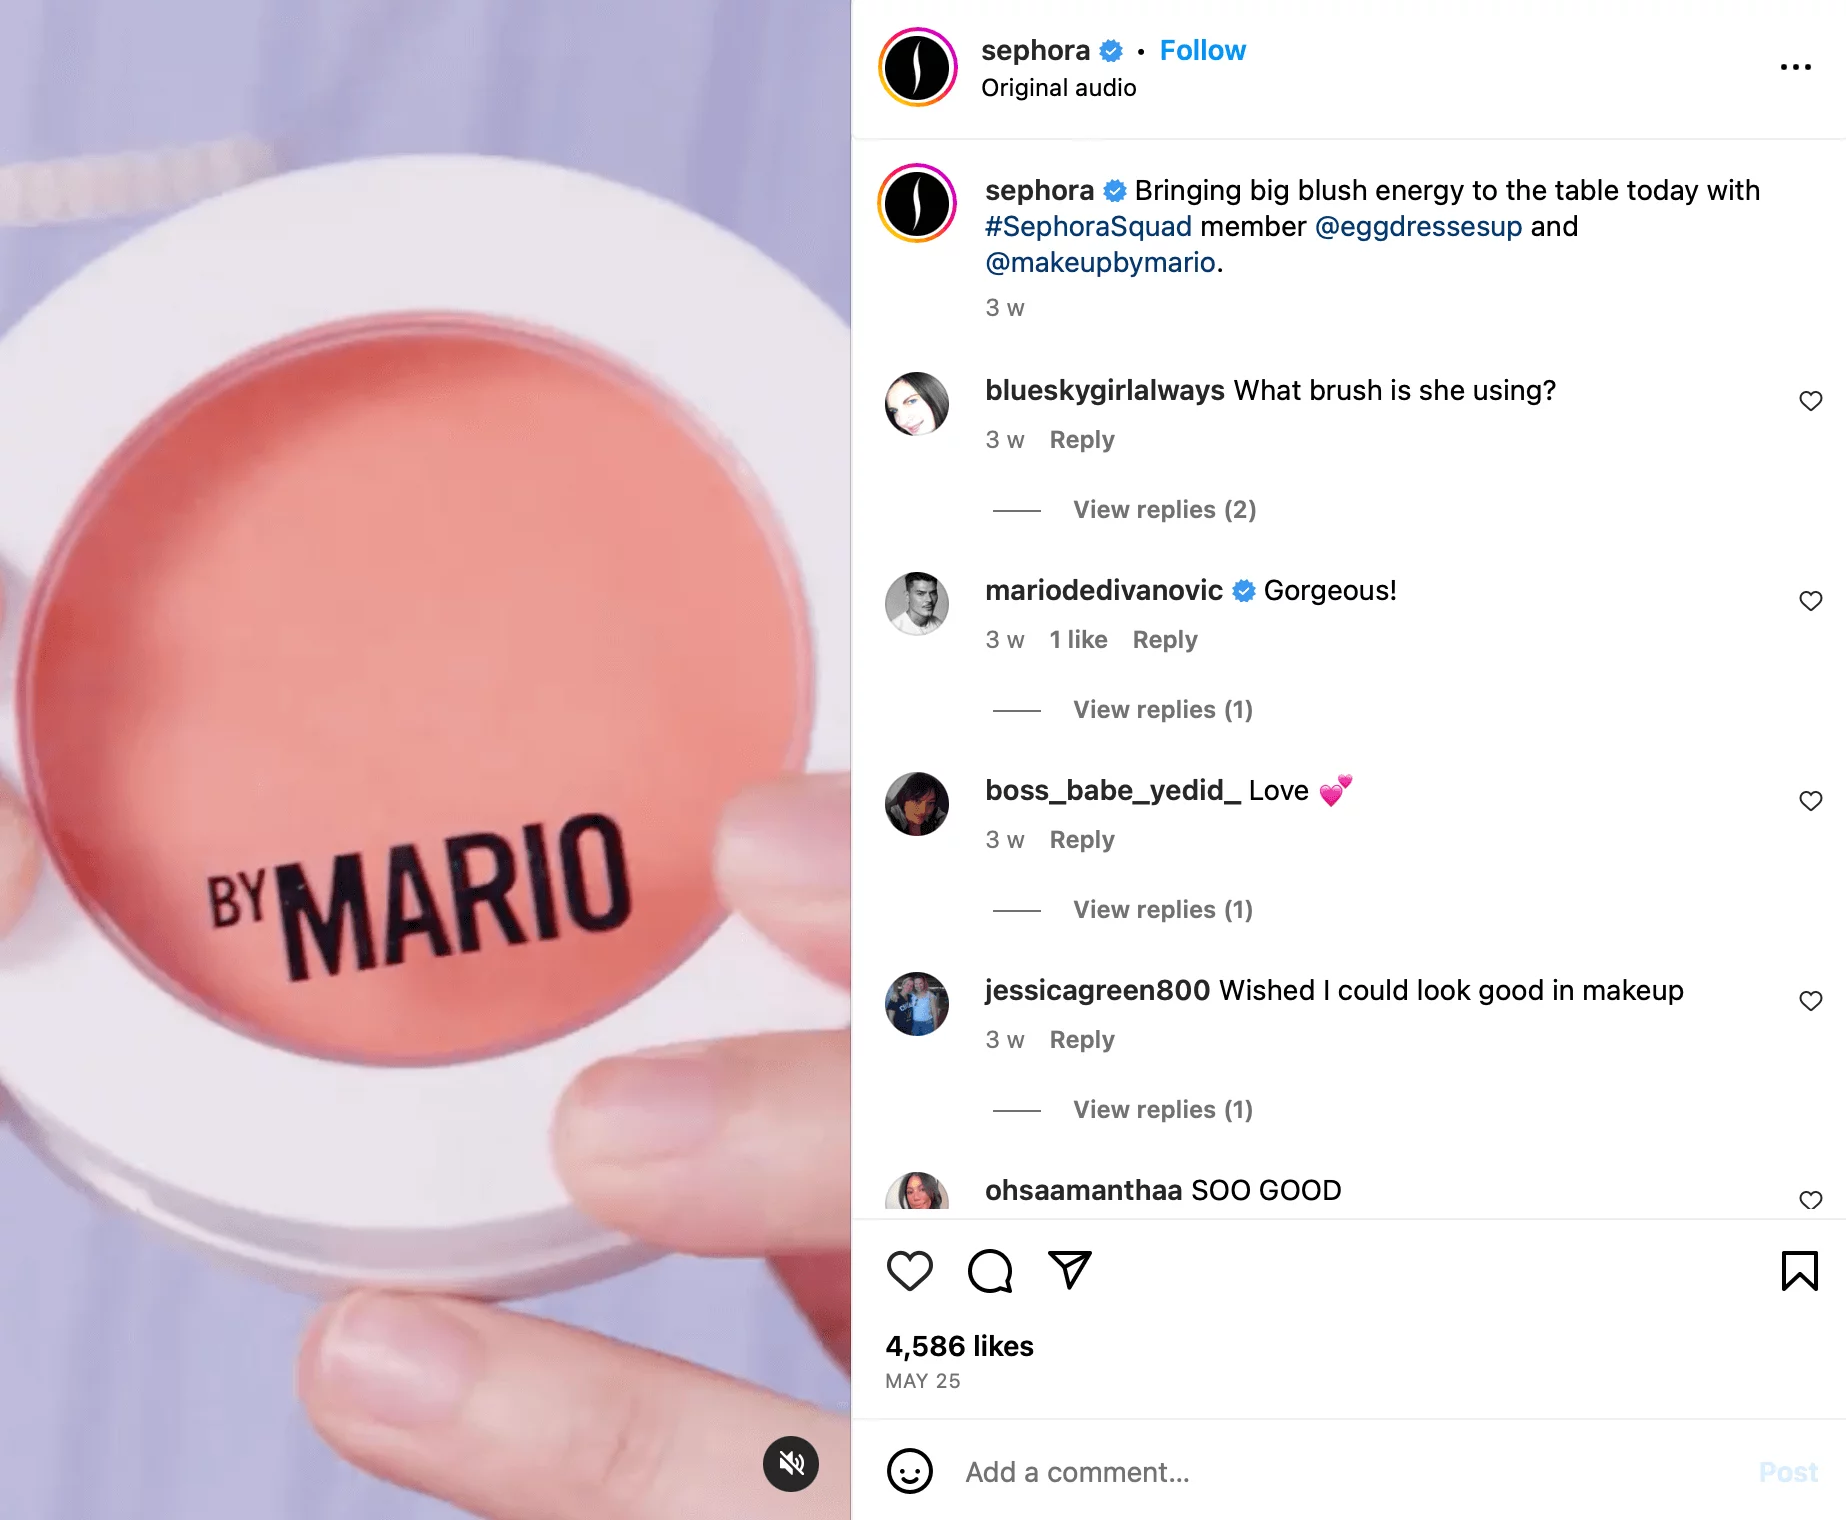 Sephora Instagram post showing a video of a blush "by Mario" with the #SephoraSquad hashtag